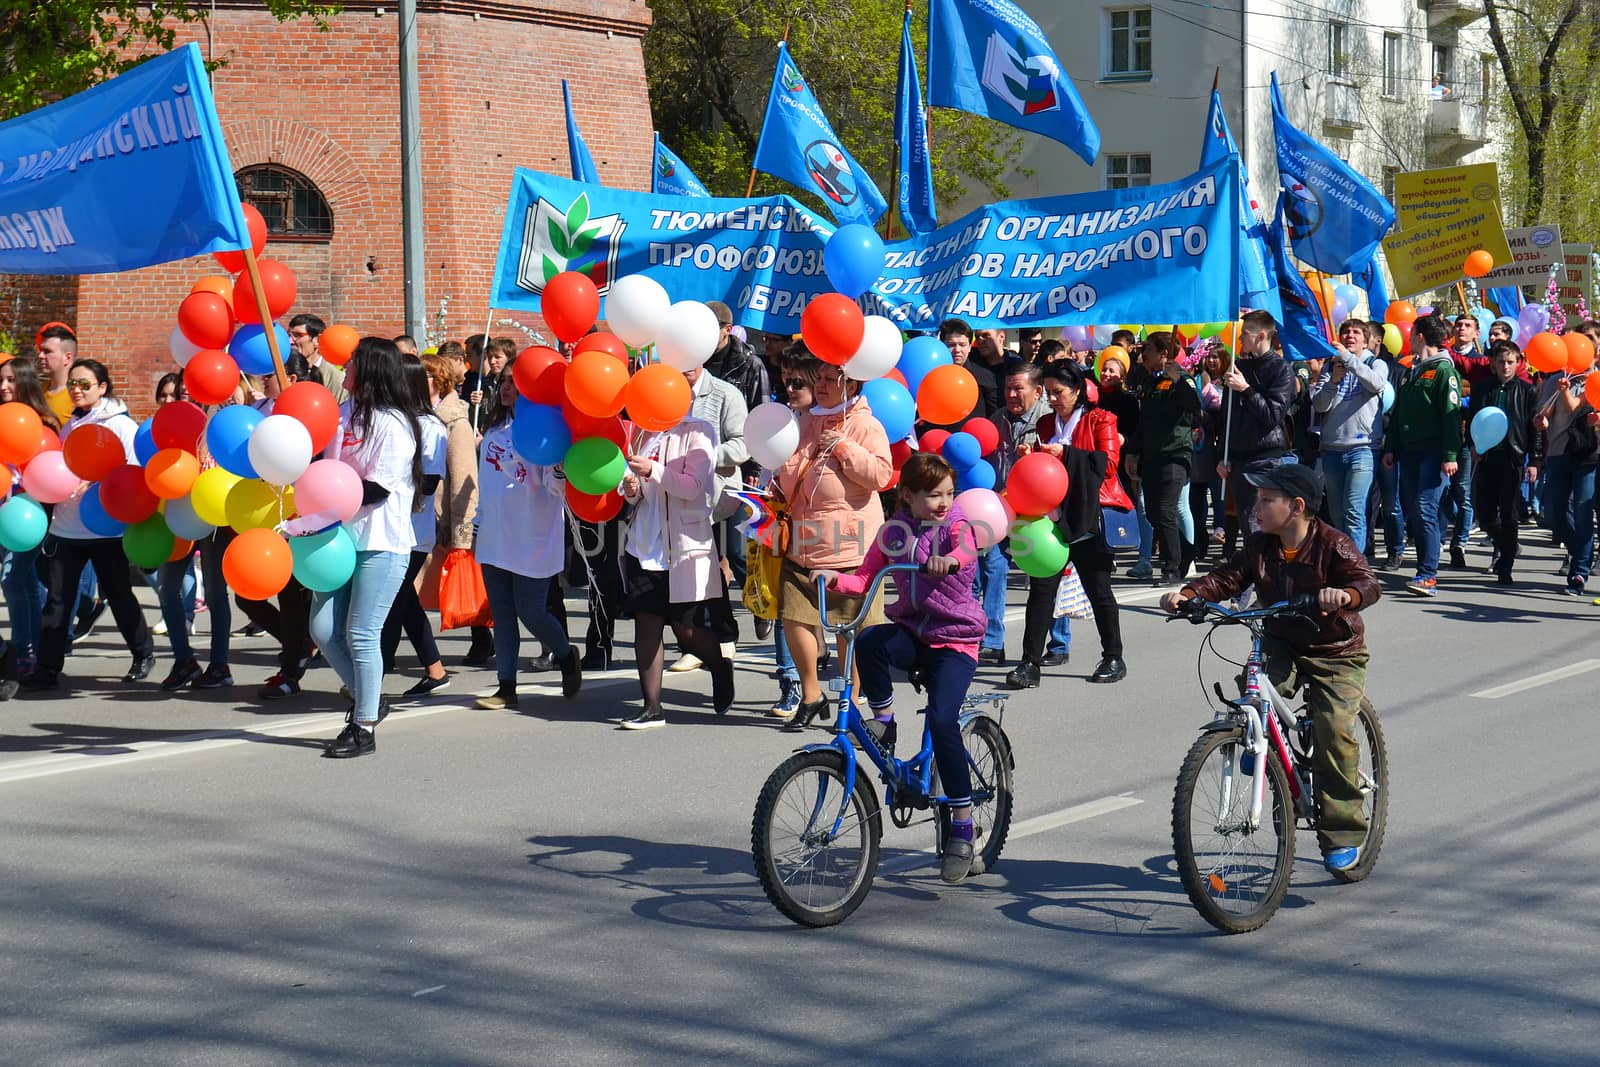 The demonstration devoted to celebration on May 1. Tyumen, Russi by veronka72